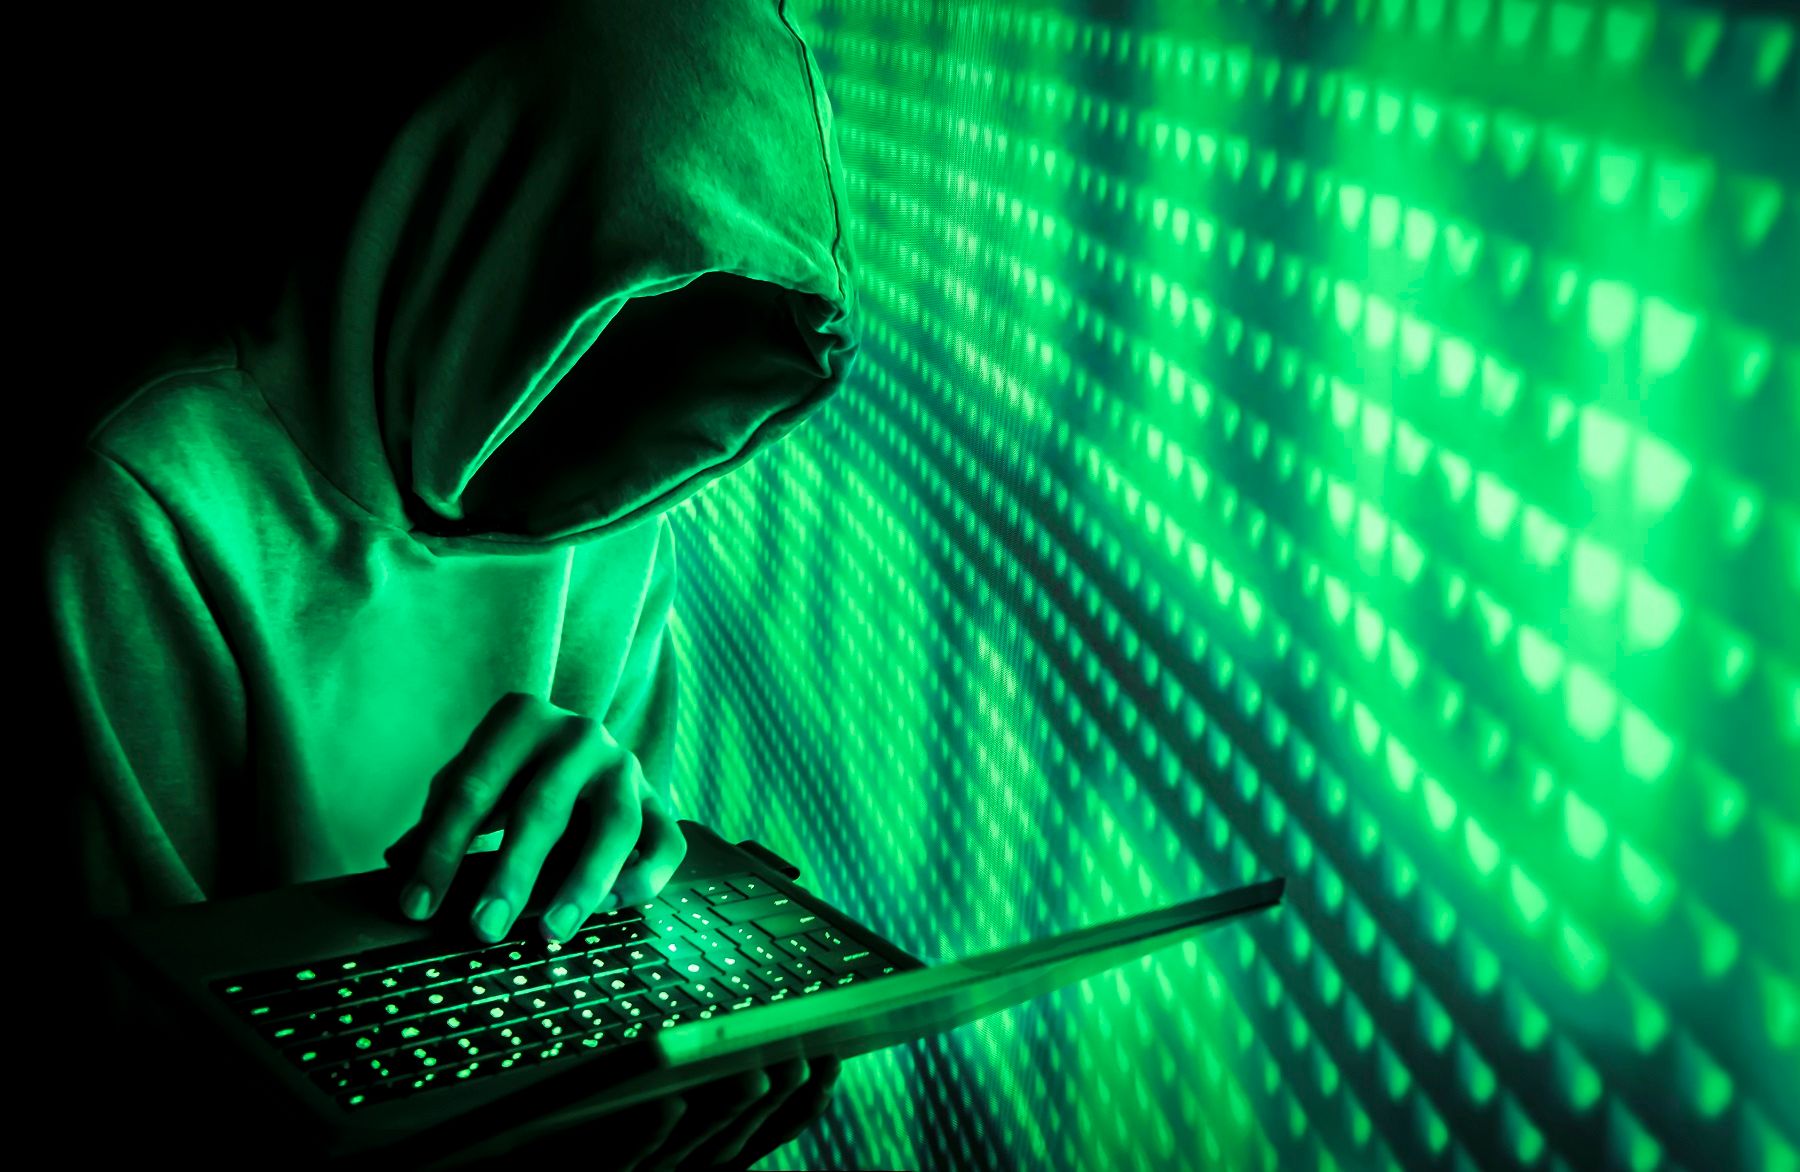 Hackers-Getty-Images-MAIN-75883251.jpg